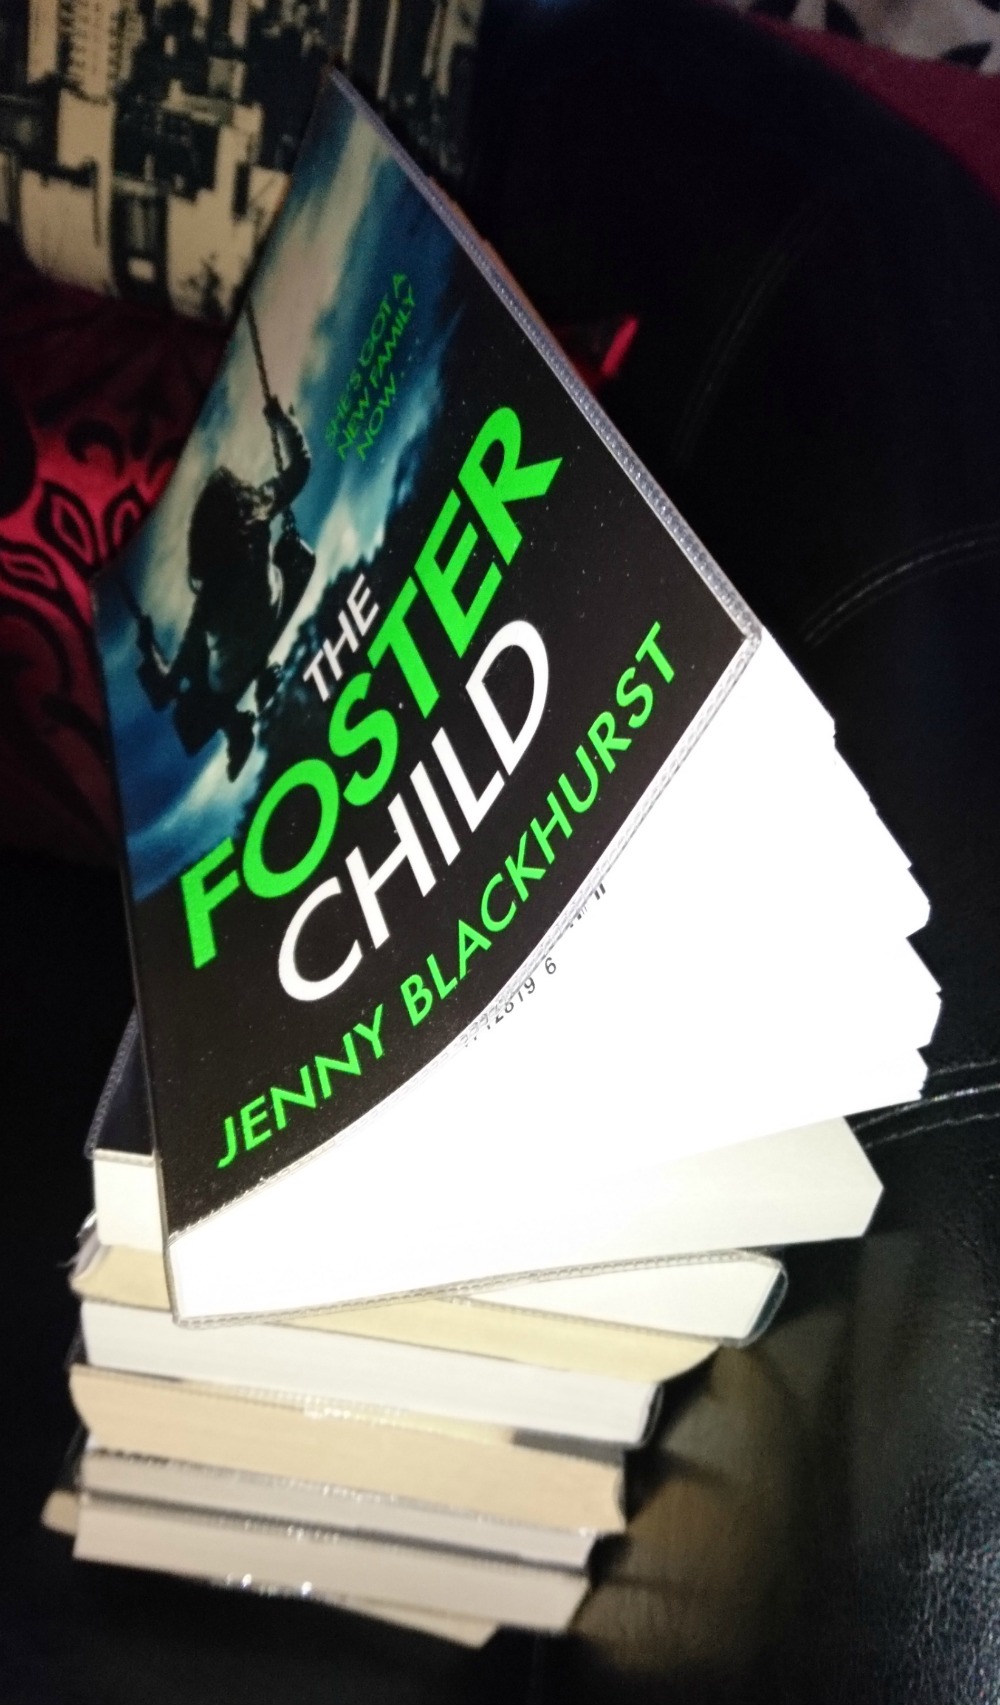 Pile of books topped by The Foster Child by Jenny Blackhurst